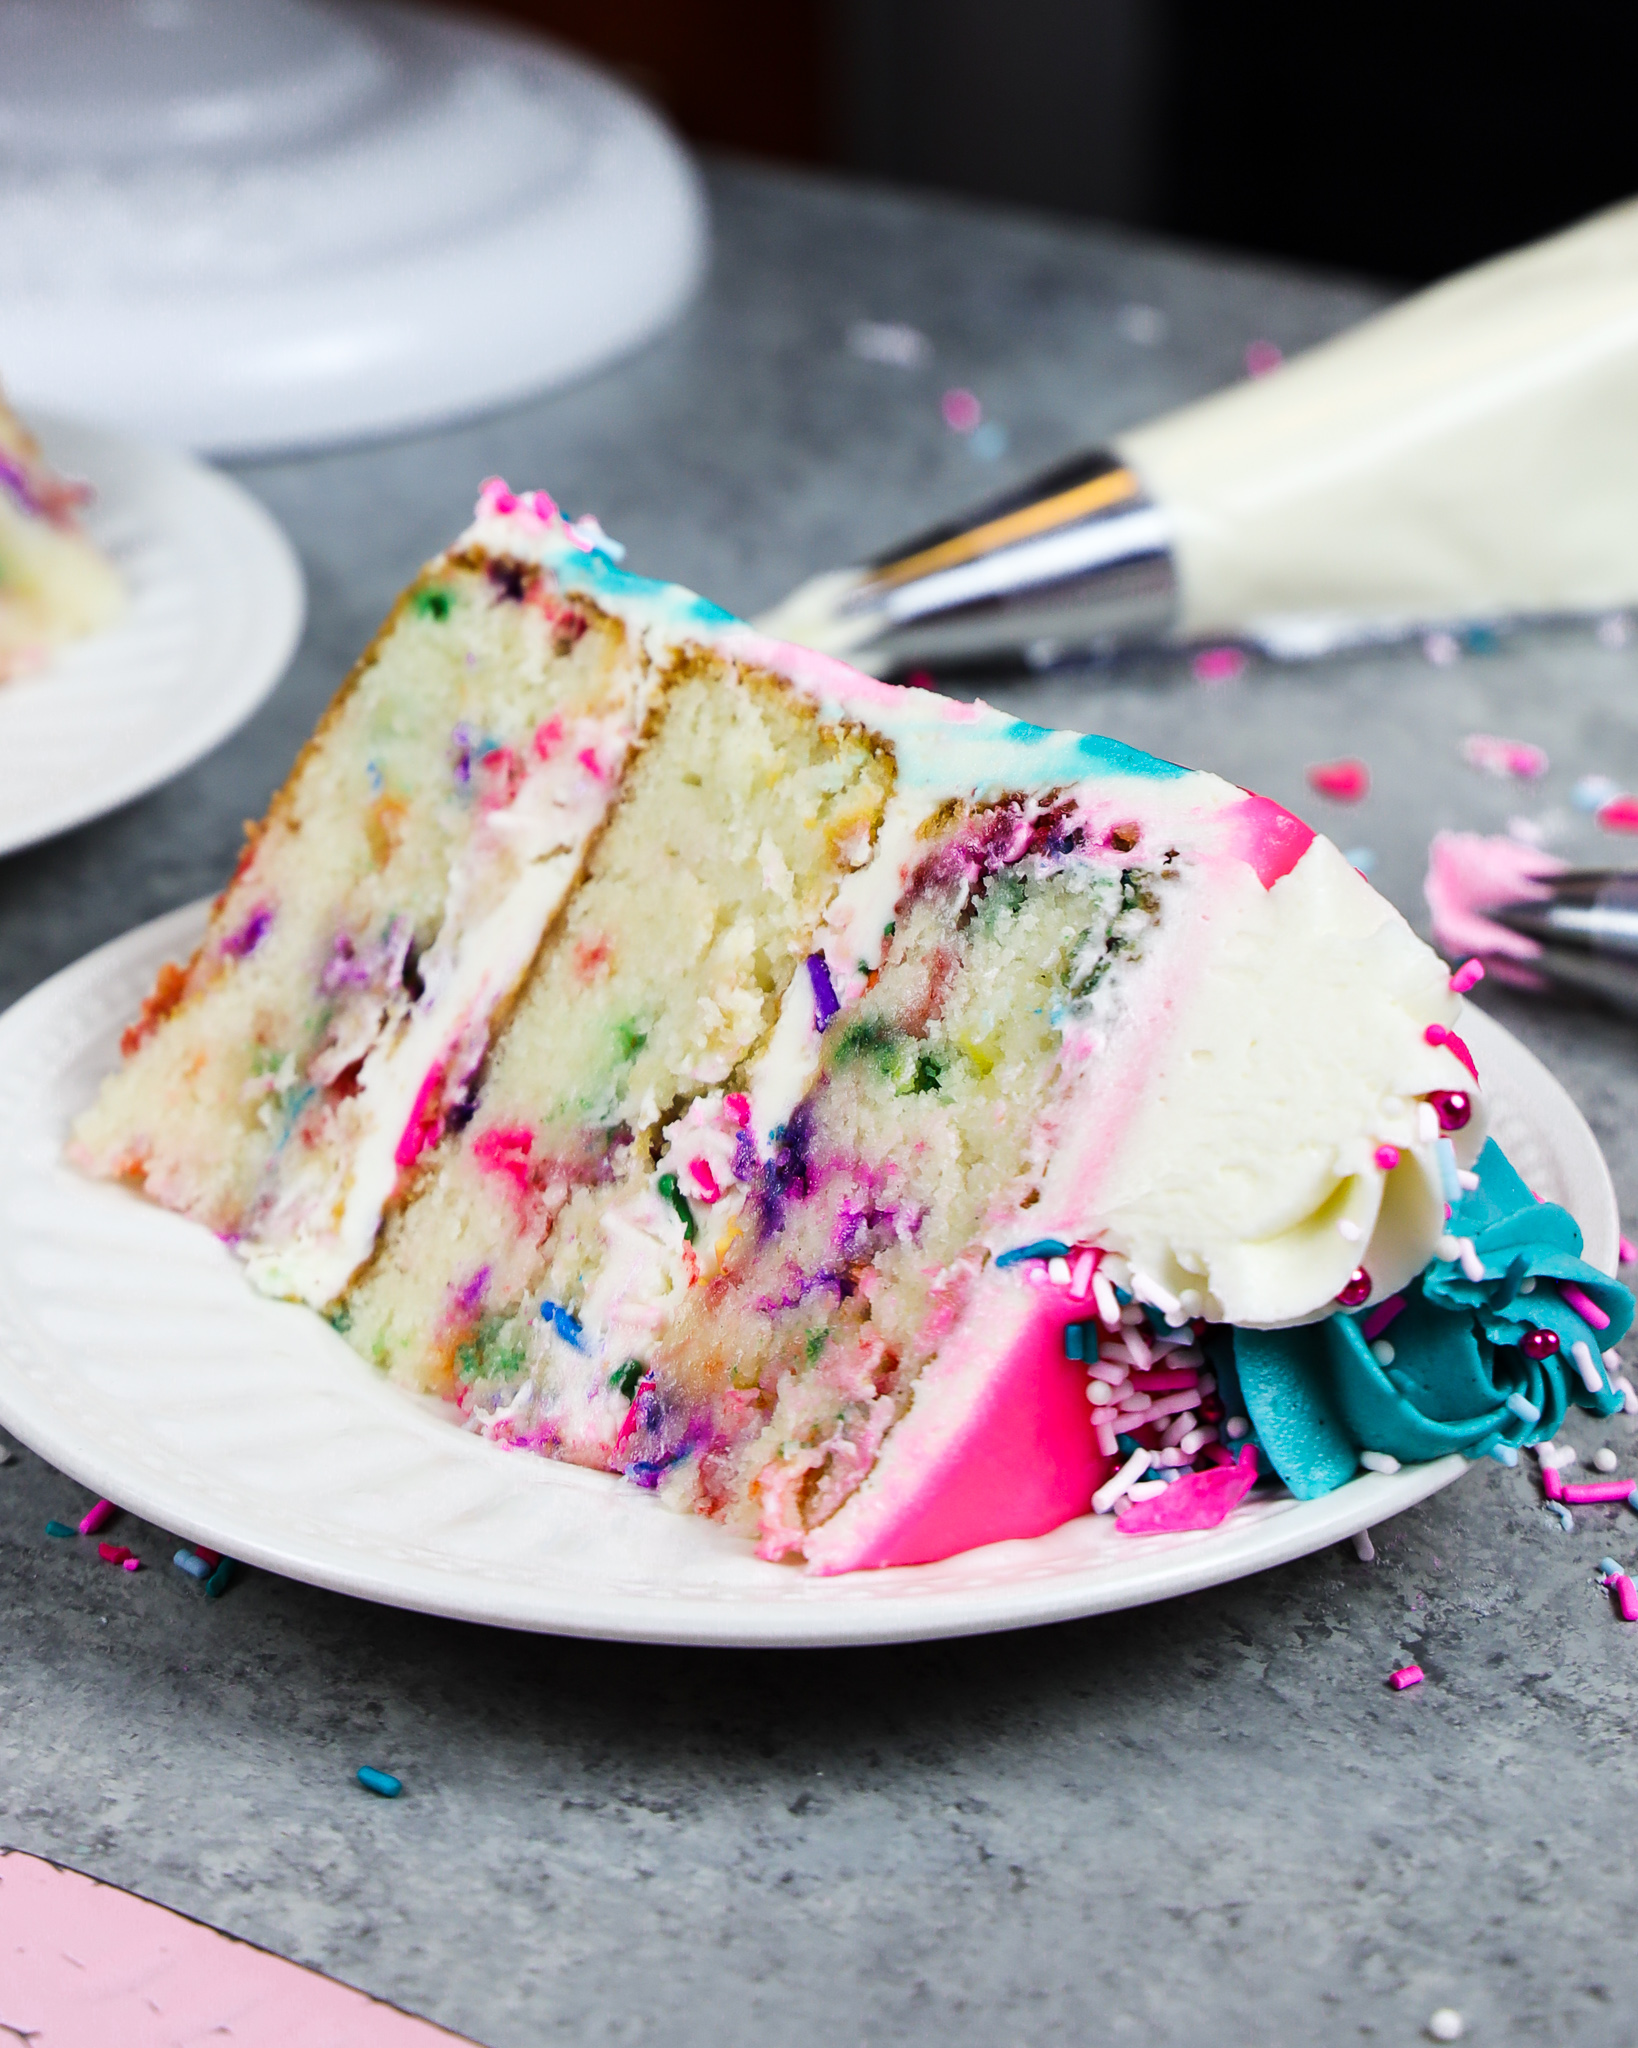 image of a slice of gluten free funfetti cake on a plate ready to be eaten